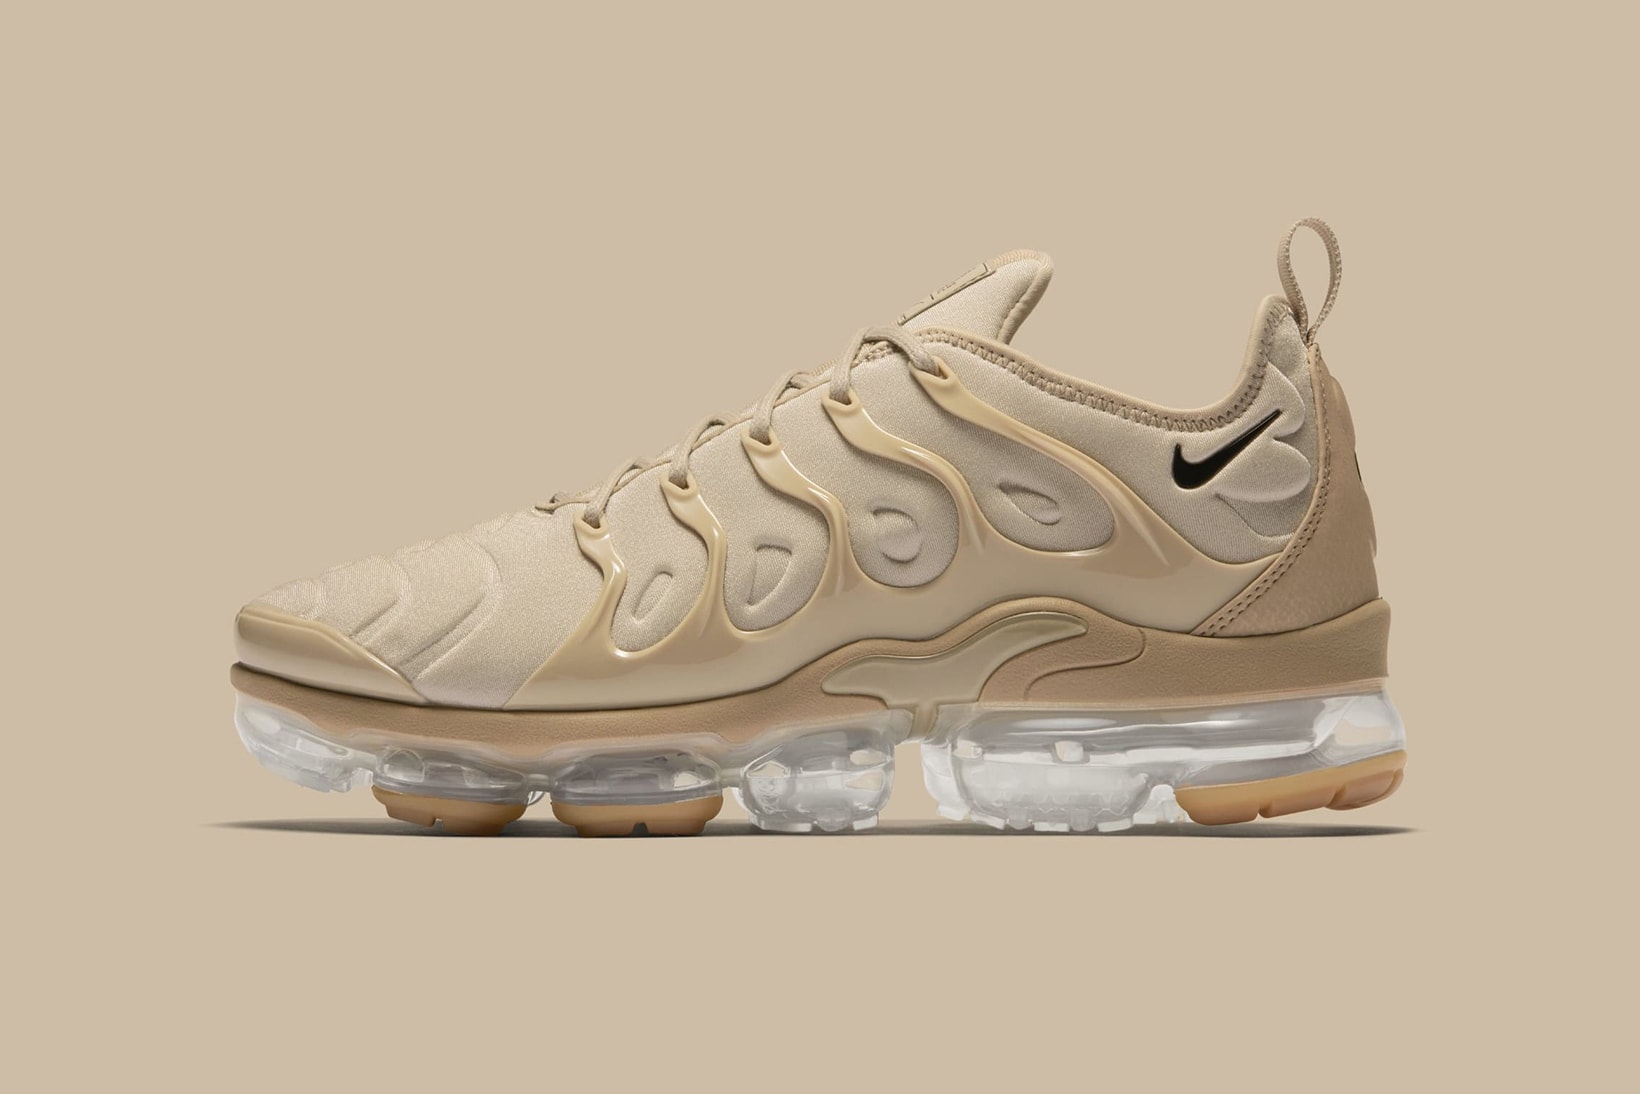 Nike Air Vapormax Plus String Dark Stucco camo camouflage summer 2018 release date info drop sneakers shoes footwear